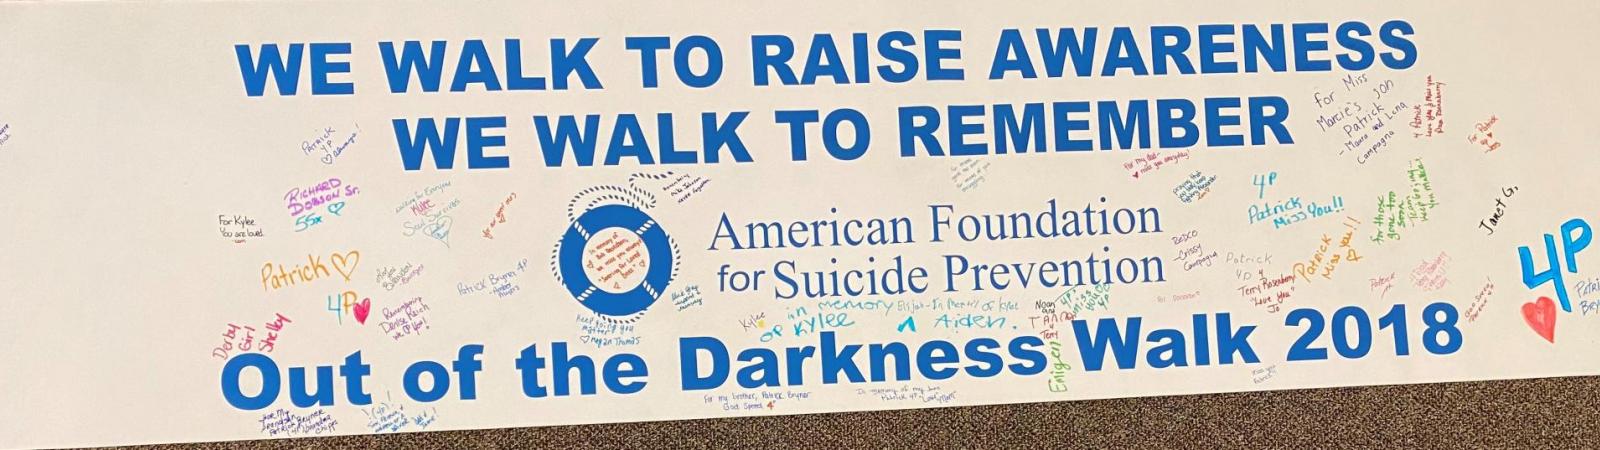 Out of the Darkness Walk Banner 2018